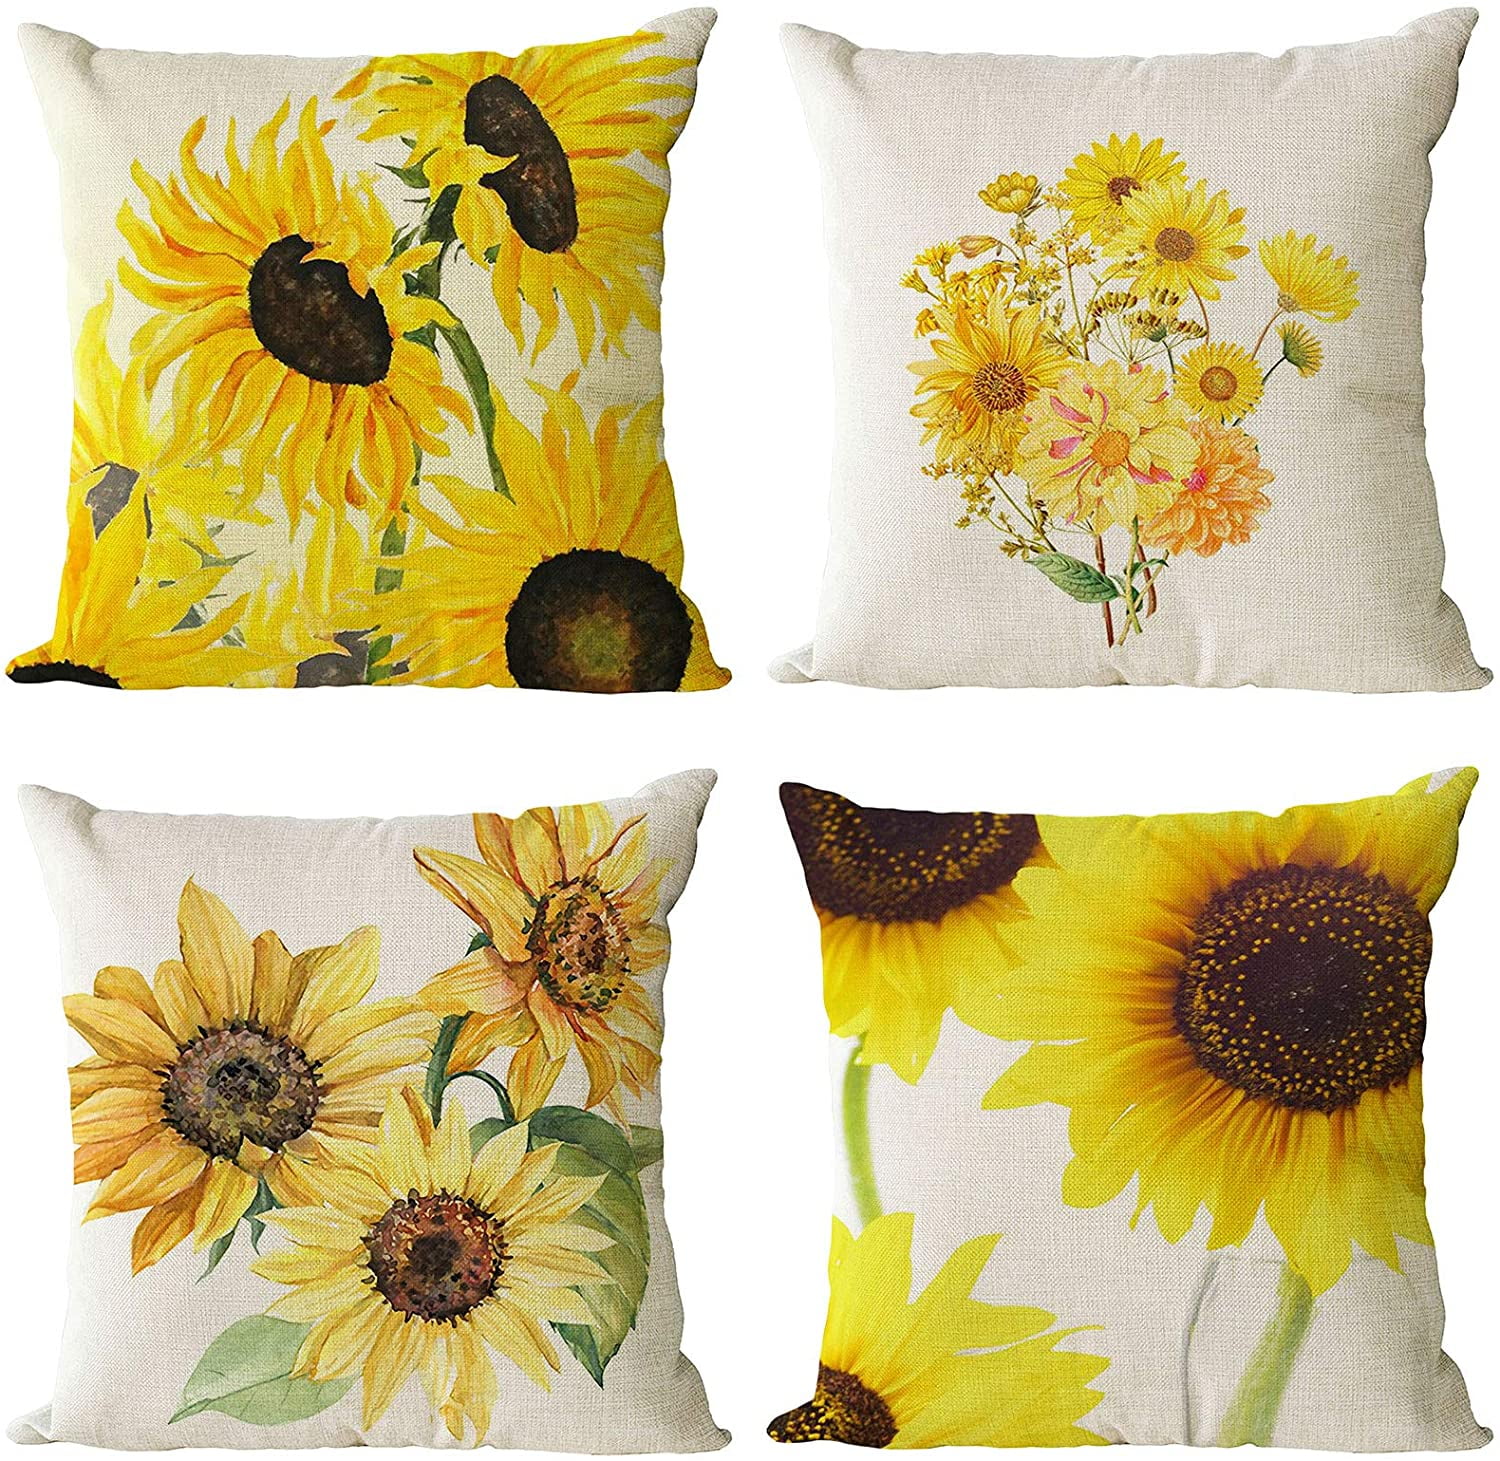 Amazon.com: GEEORY Fall Pillow Covers 16x16 Set of 4 for Fall Decor Pumpkin  Maple Leaves Sunflower Vase Outdoor Fall Pillows Decorative Throw Pillows  Farmhouse Thanksgiving Autumn Cushion Case for Couch A :